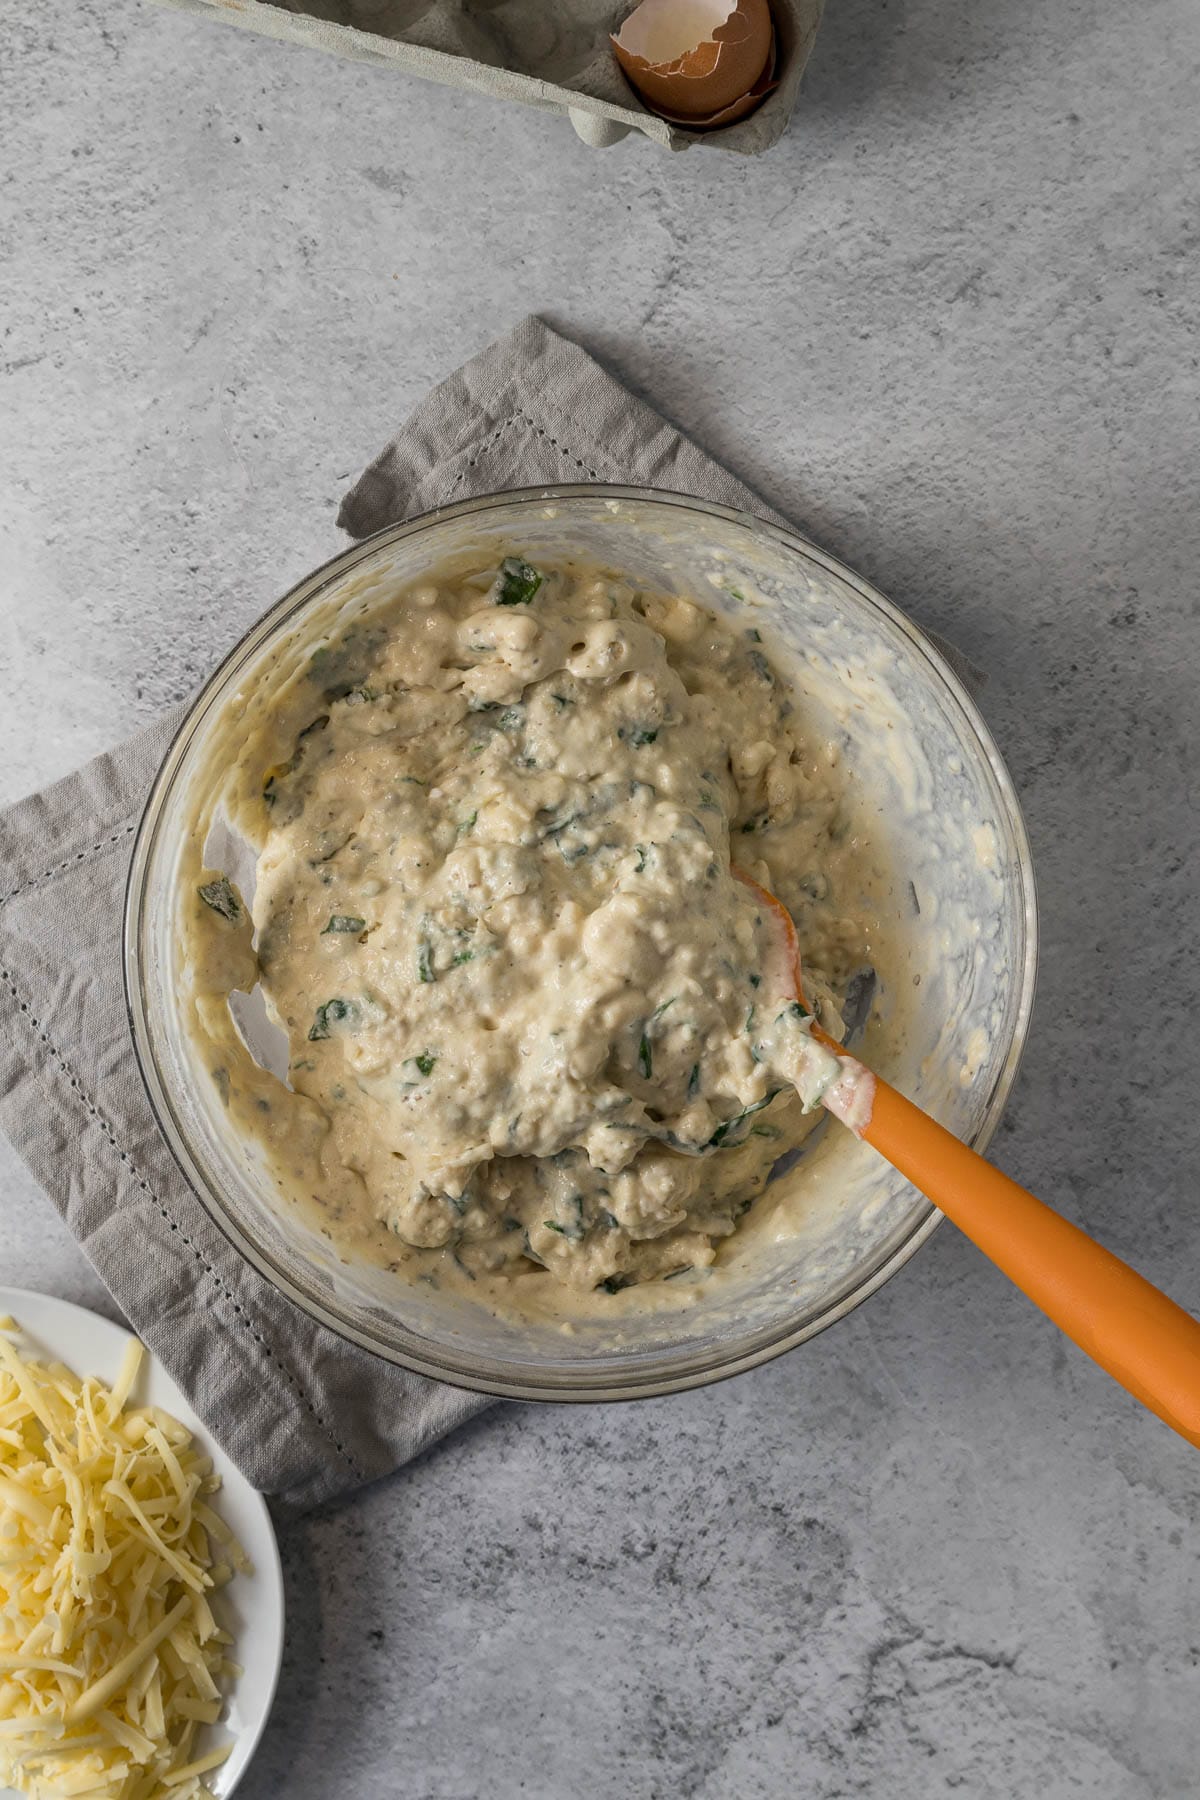 Feta and spinach muffin batter.